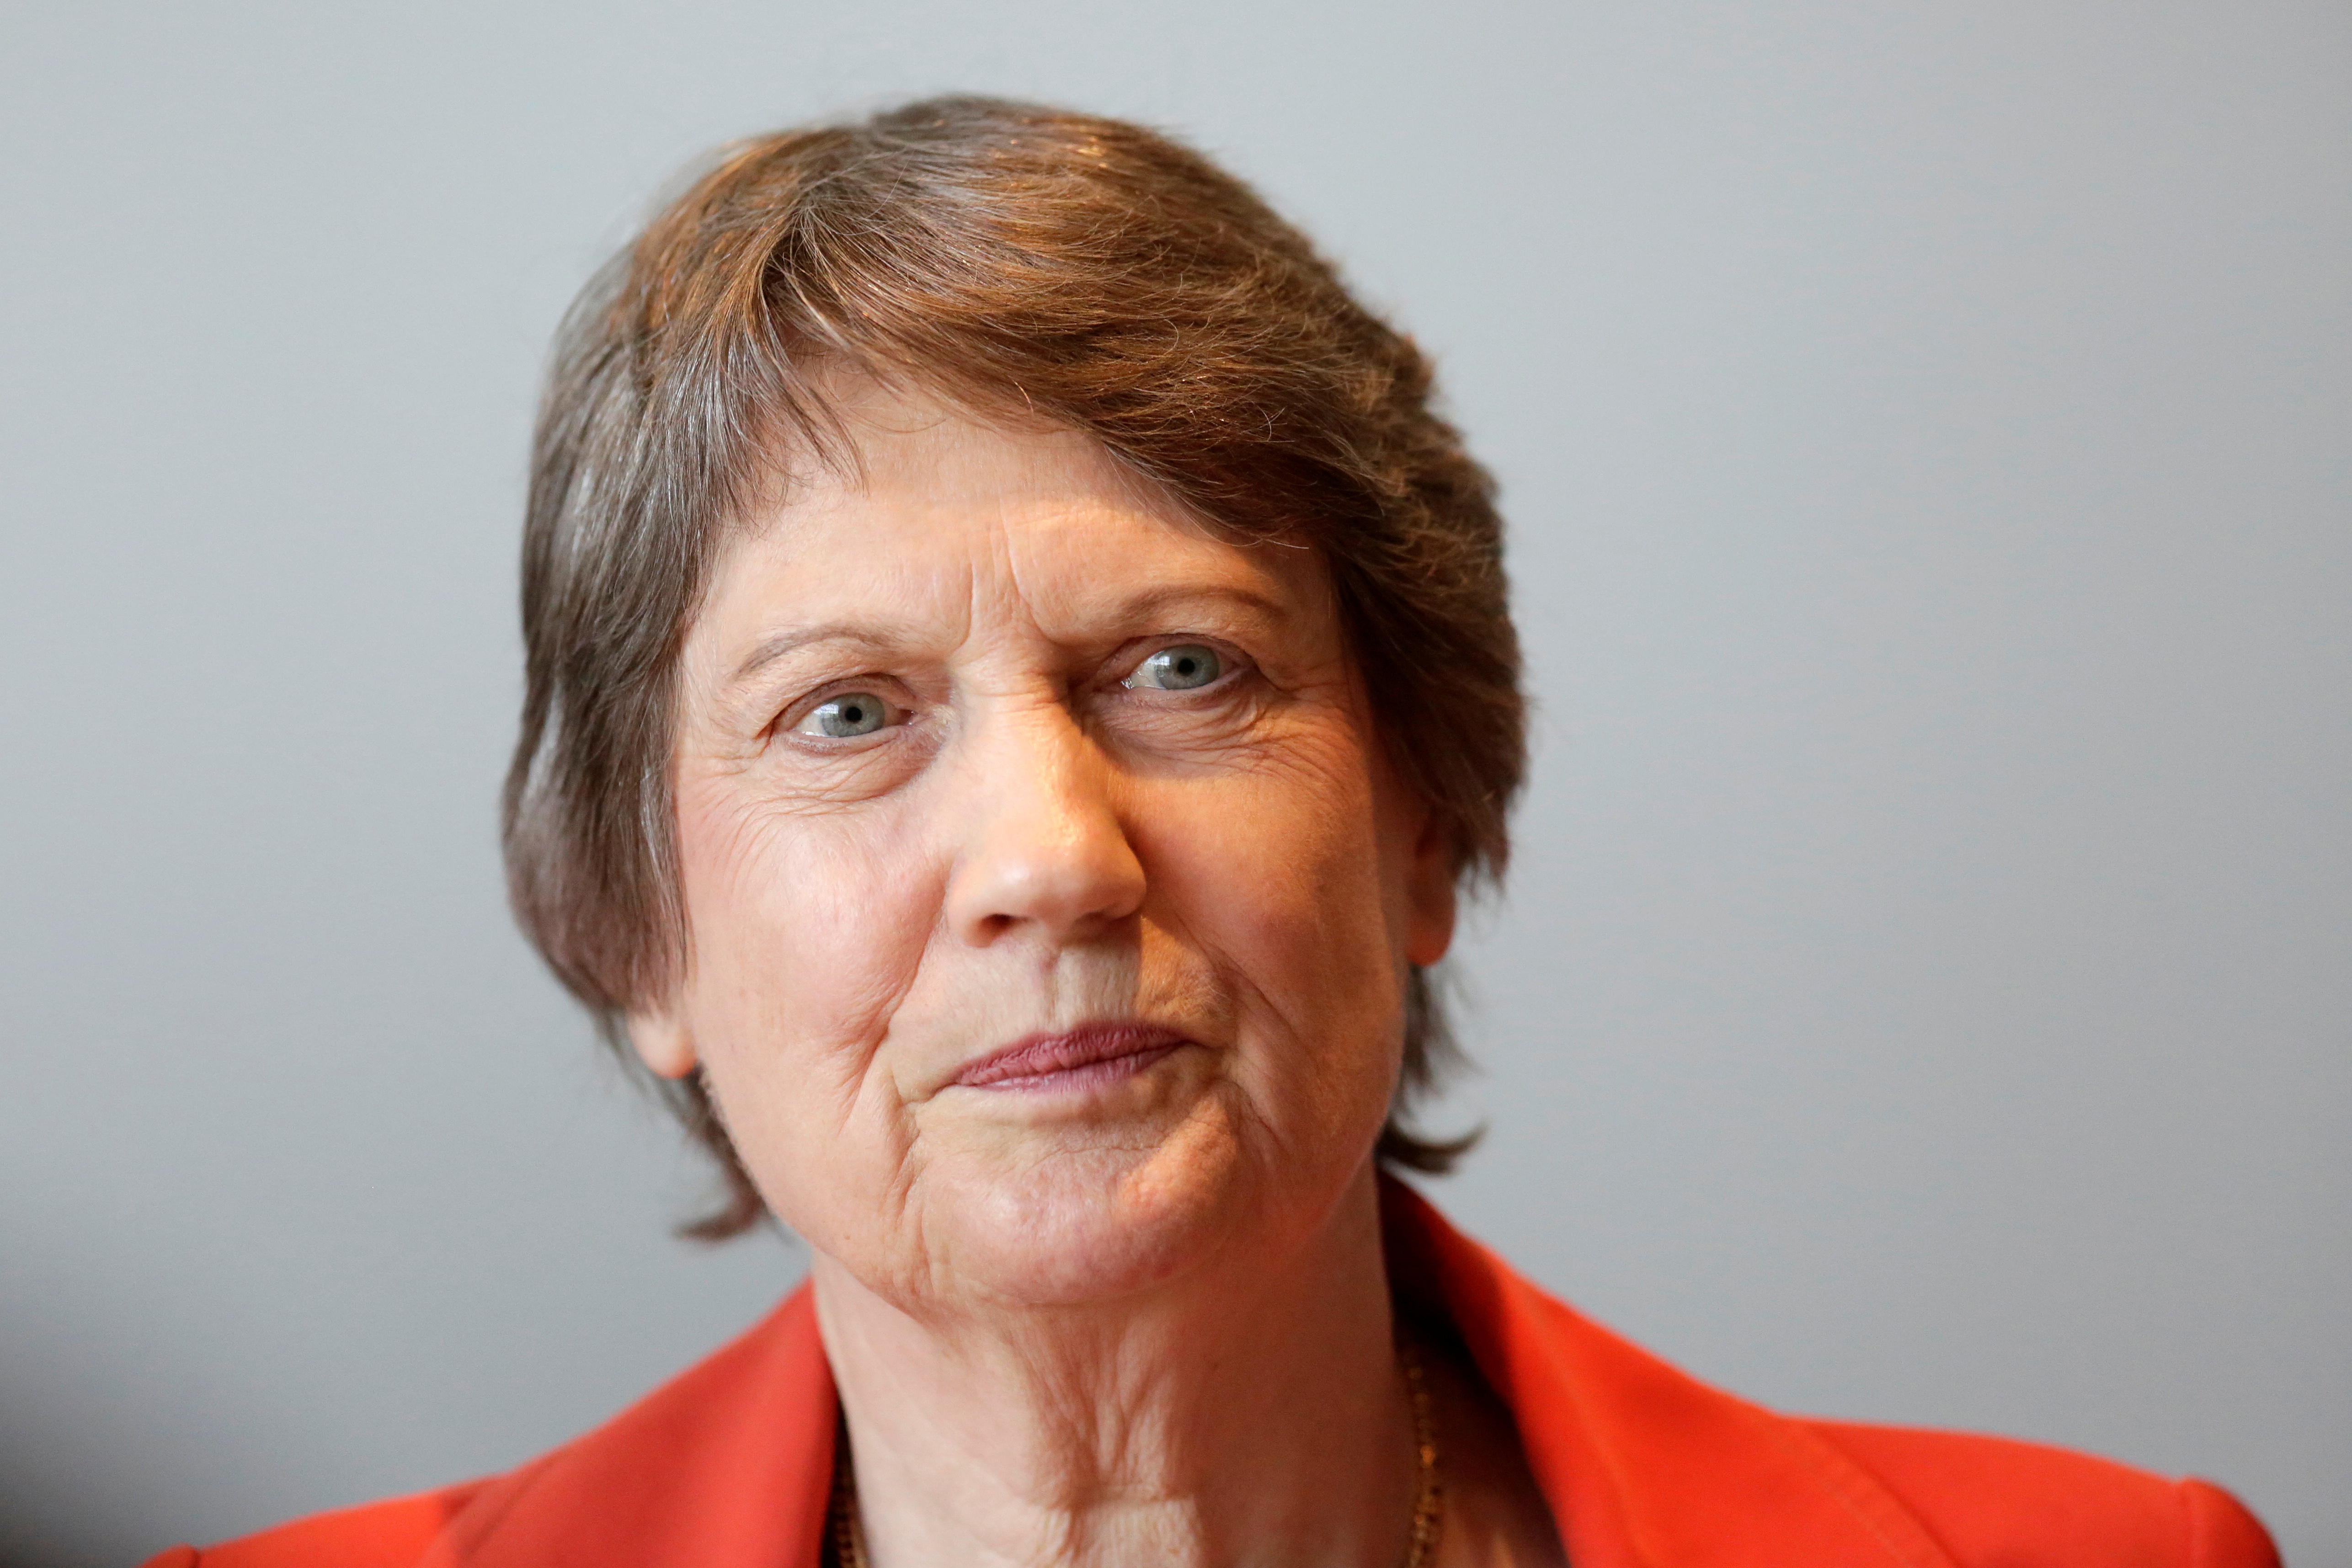 Helen Clark, former Prime Minister of New Zealand and member of the Global Commission on Drug Policy, attends a meeting of the commission in Mexico City